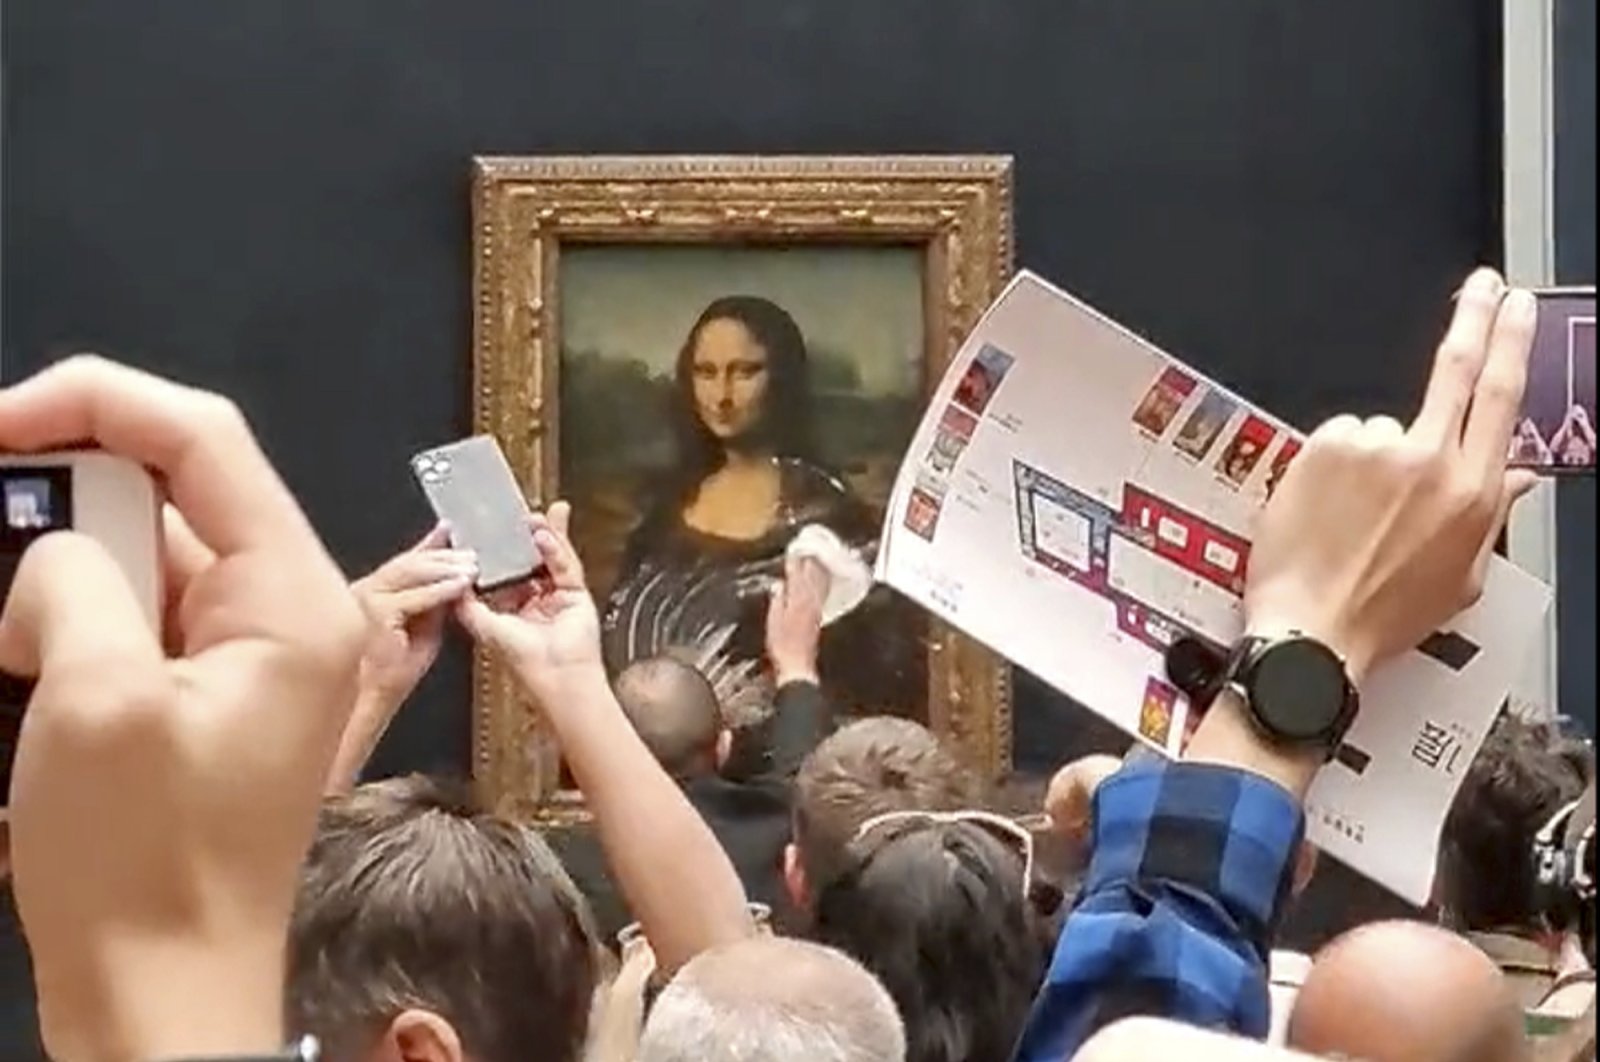 A security guard cleans the smeared cream from the glass protecting the Mona Lisa at the Louvre Museum, in Paris, France, May 29, 2022. (AP Photo)